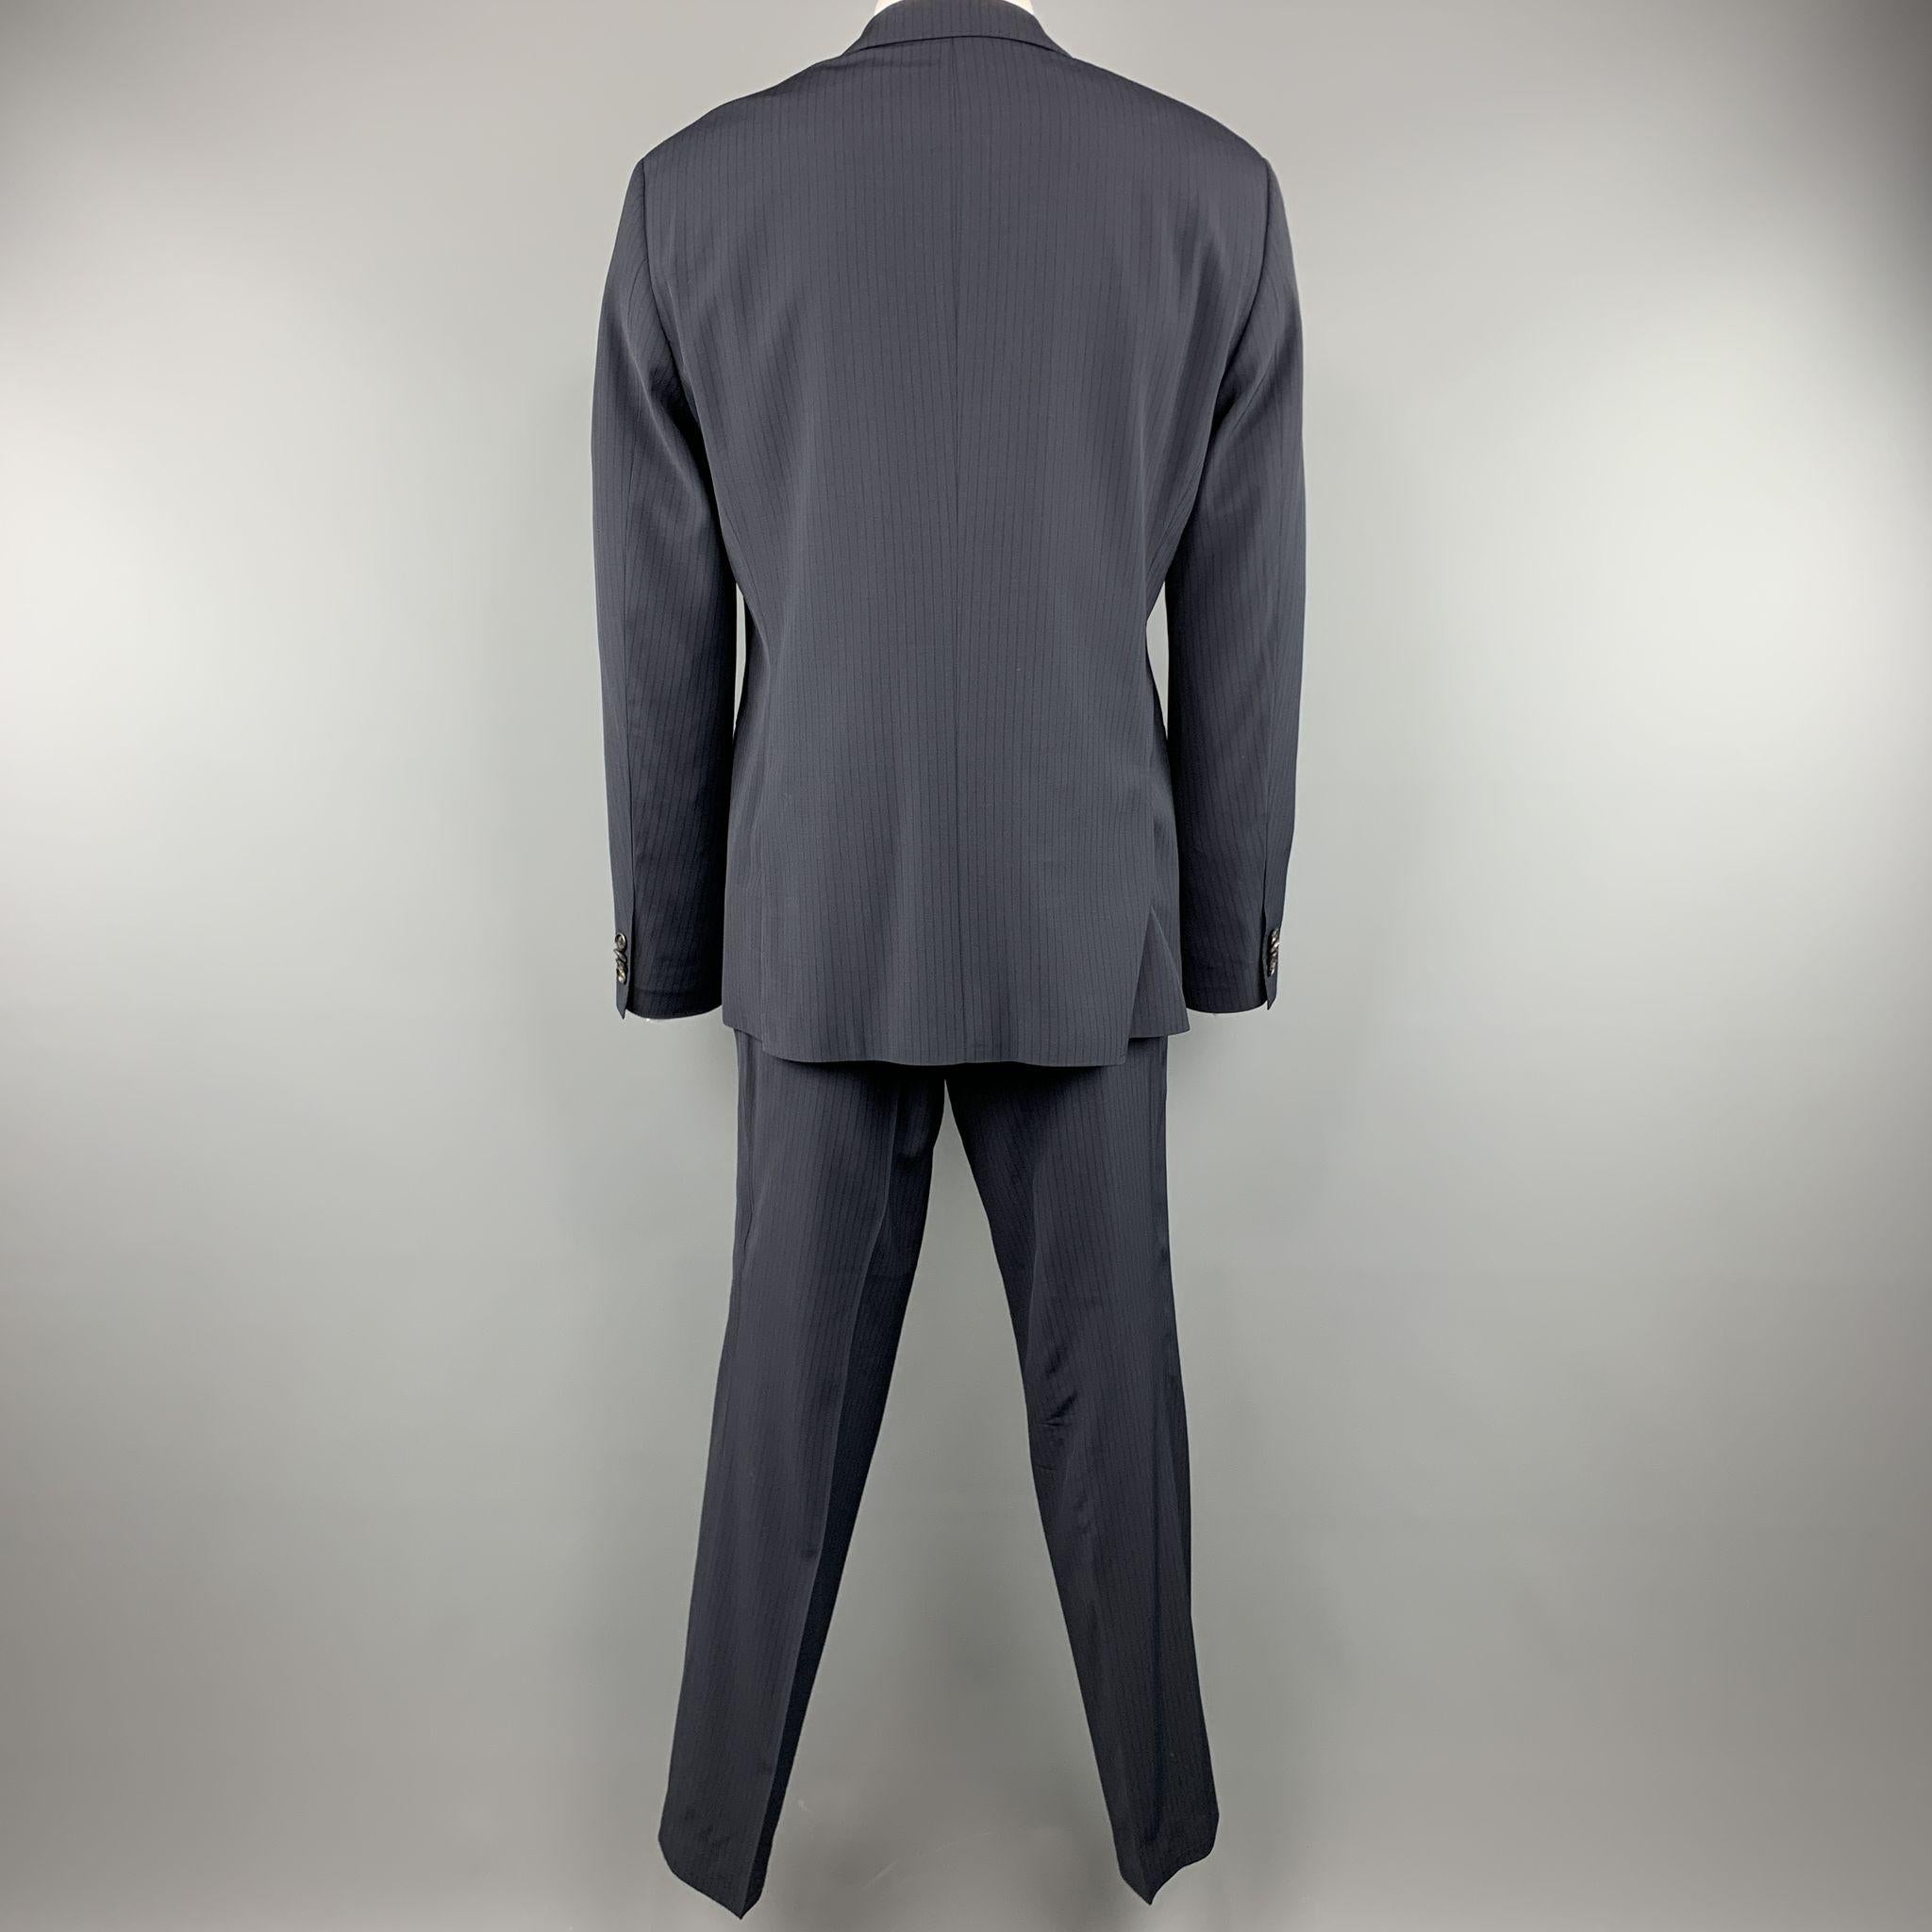 HUGO BOSS suit comes in a navy stripe wool / elastane and includes a single breasted, two button sport coat with notch lapel and matching front trousers.

Excellent Pre-Owned Condition.
Marked: 44 R

Measurements:

-Jacket
l Shoulder: 20.5 in.
l